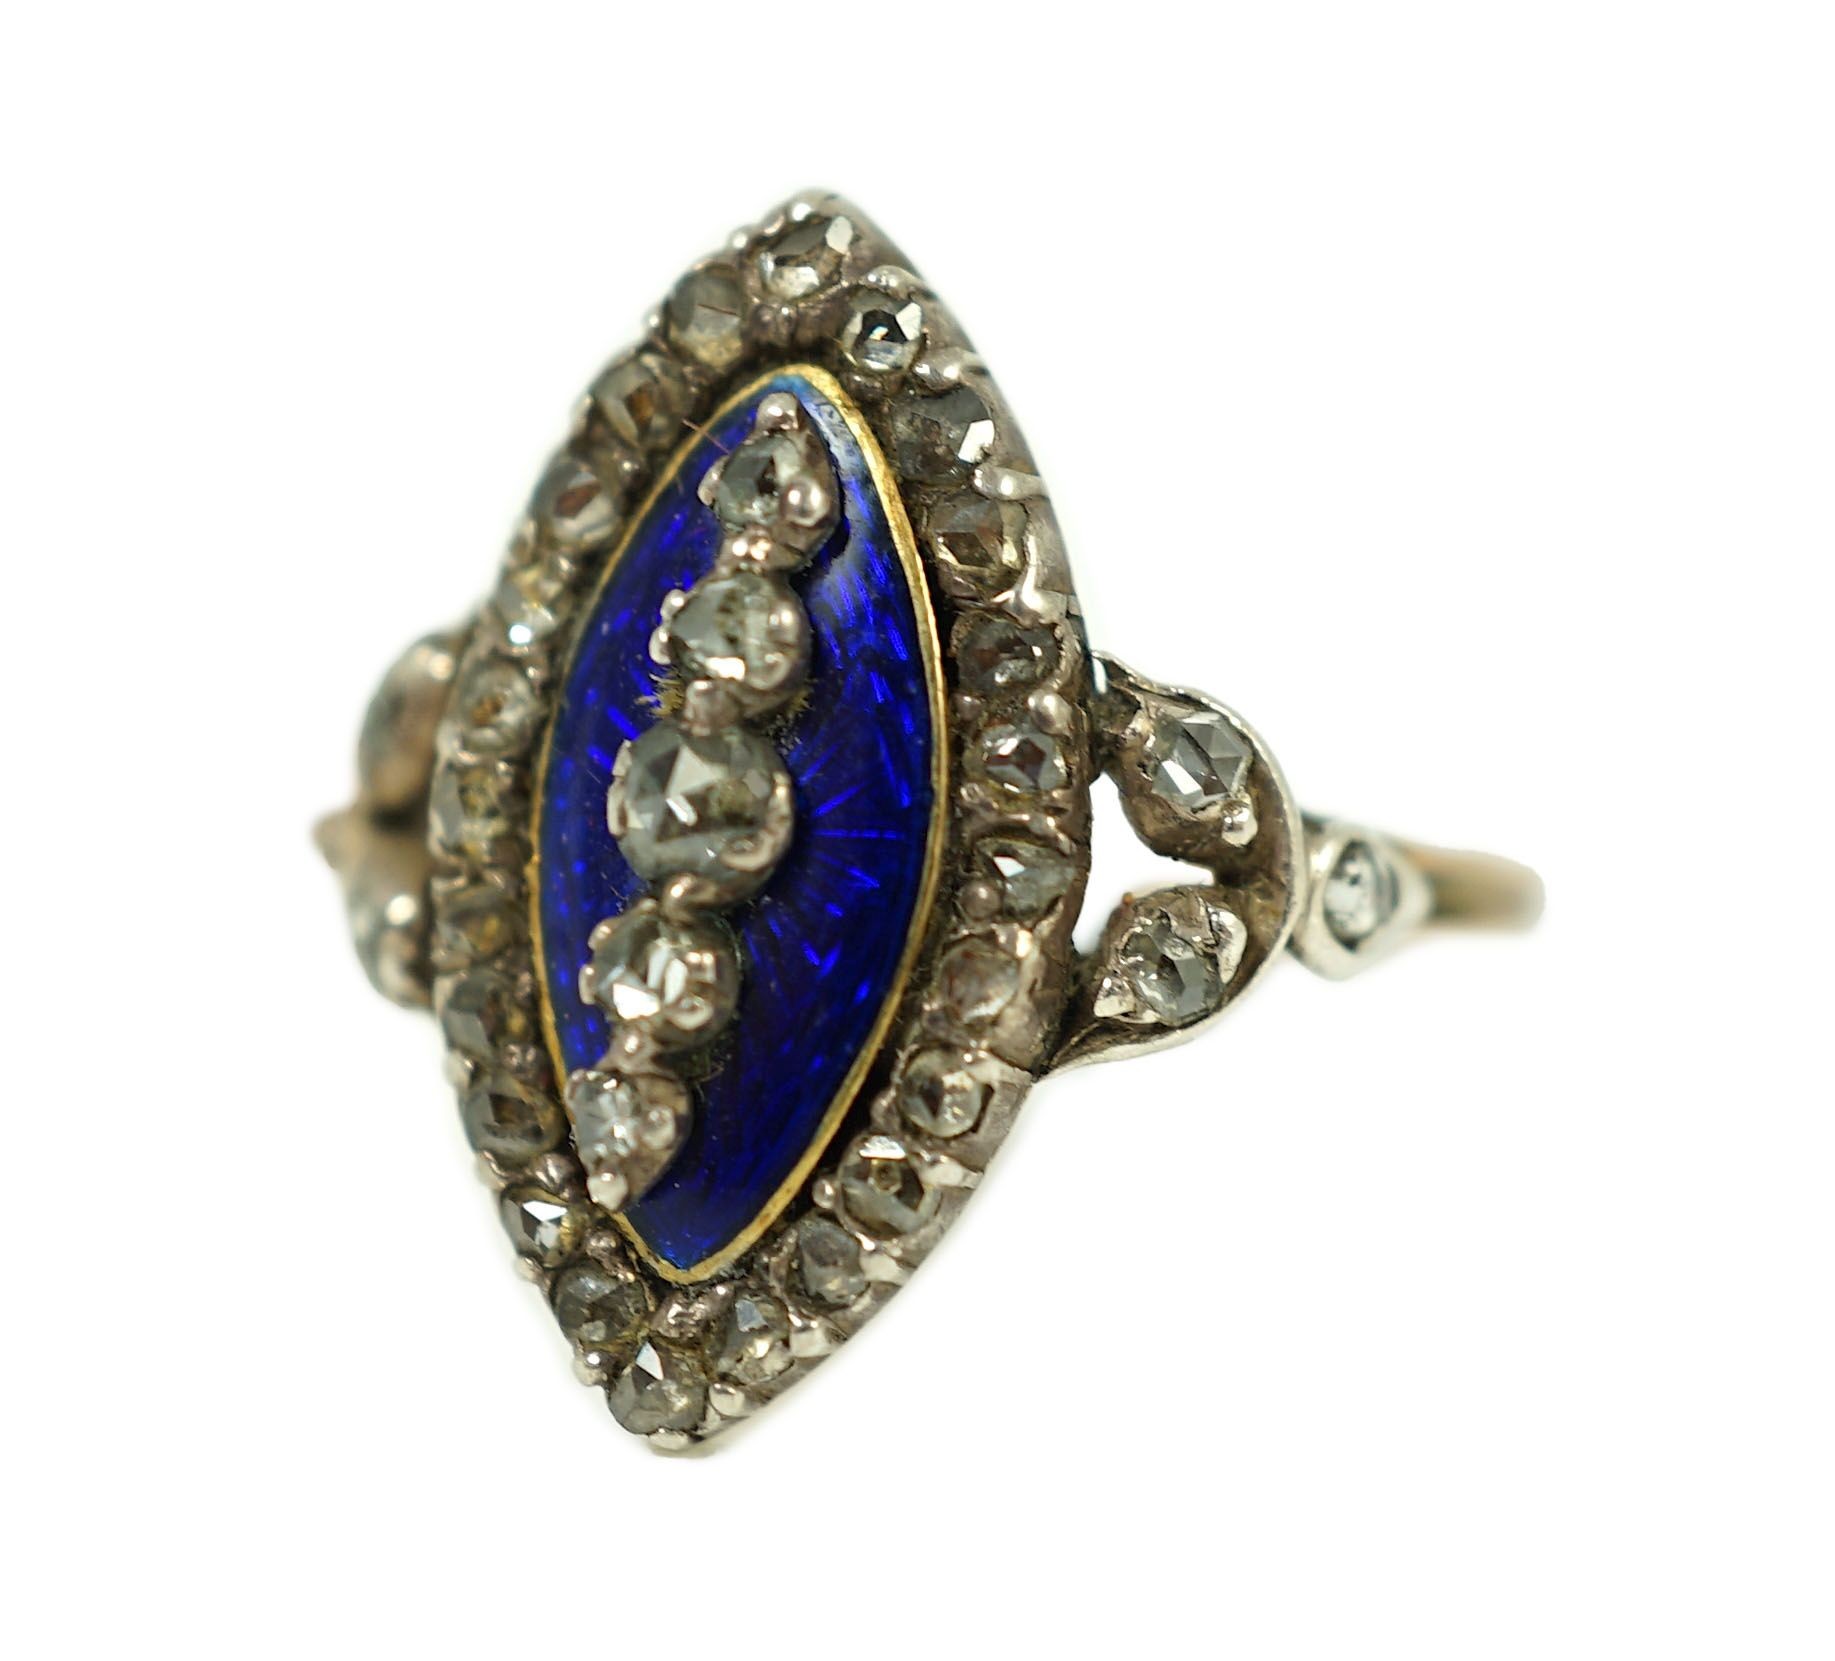 An 19th century gold, rose cut diamond and blue guilloche enamel set marquise shaped ring